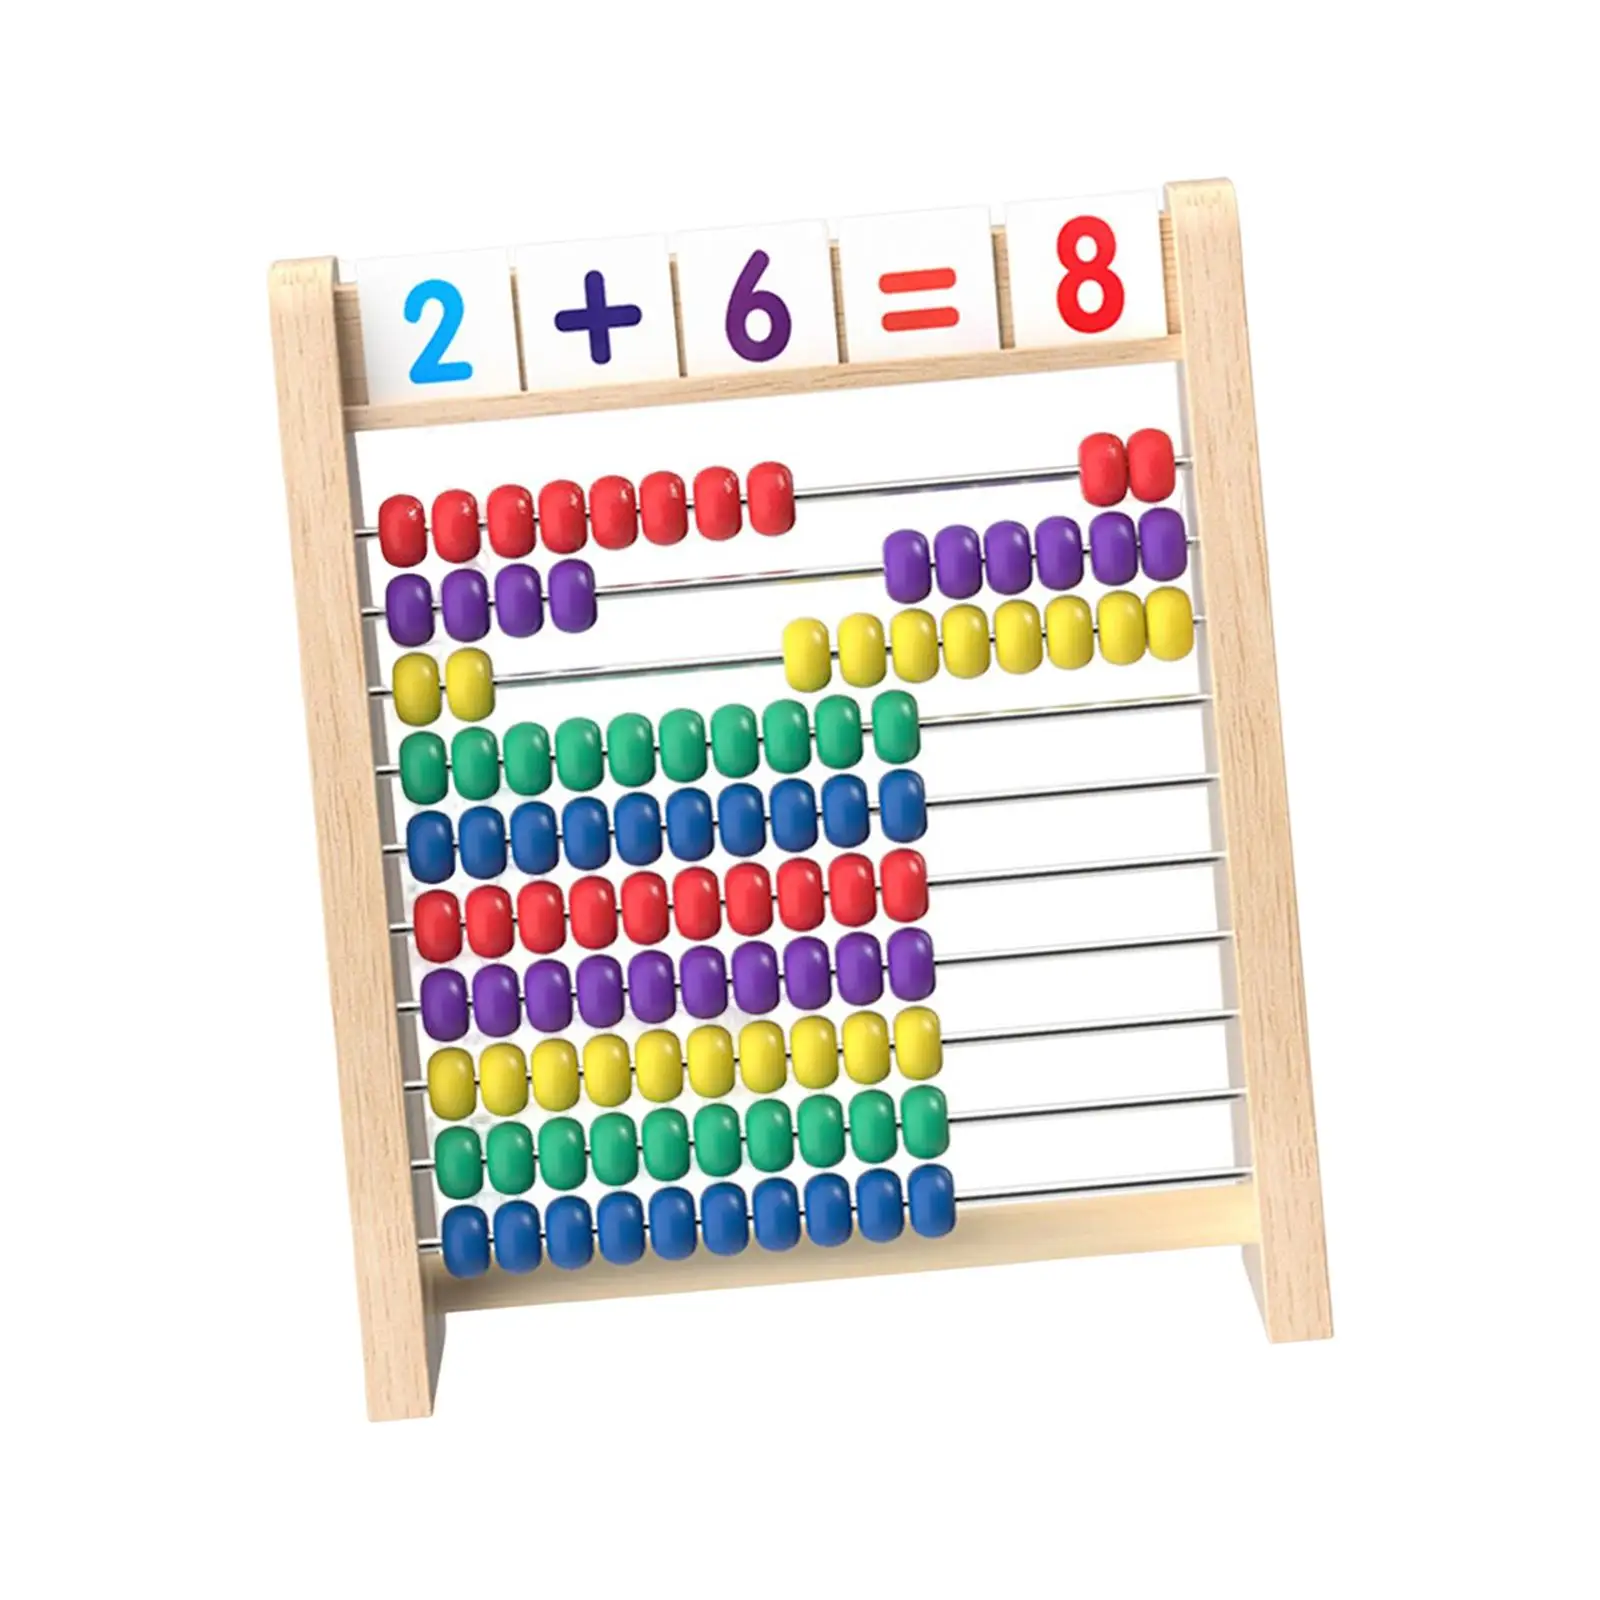 10 Row Preschool Learning Toy Counting Arithmetic Learning Math Learning Toys for Activity Toys